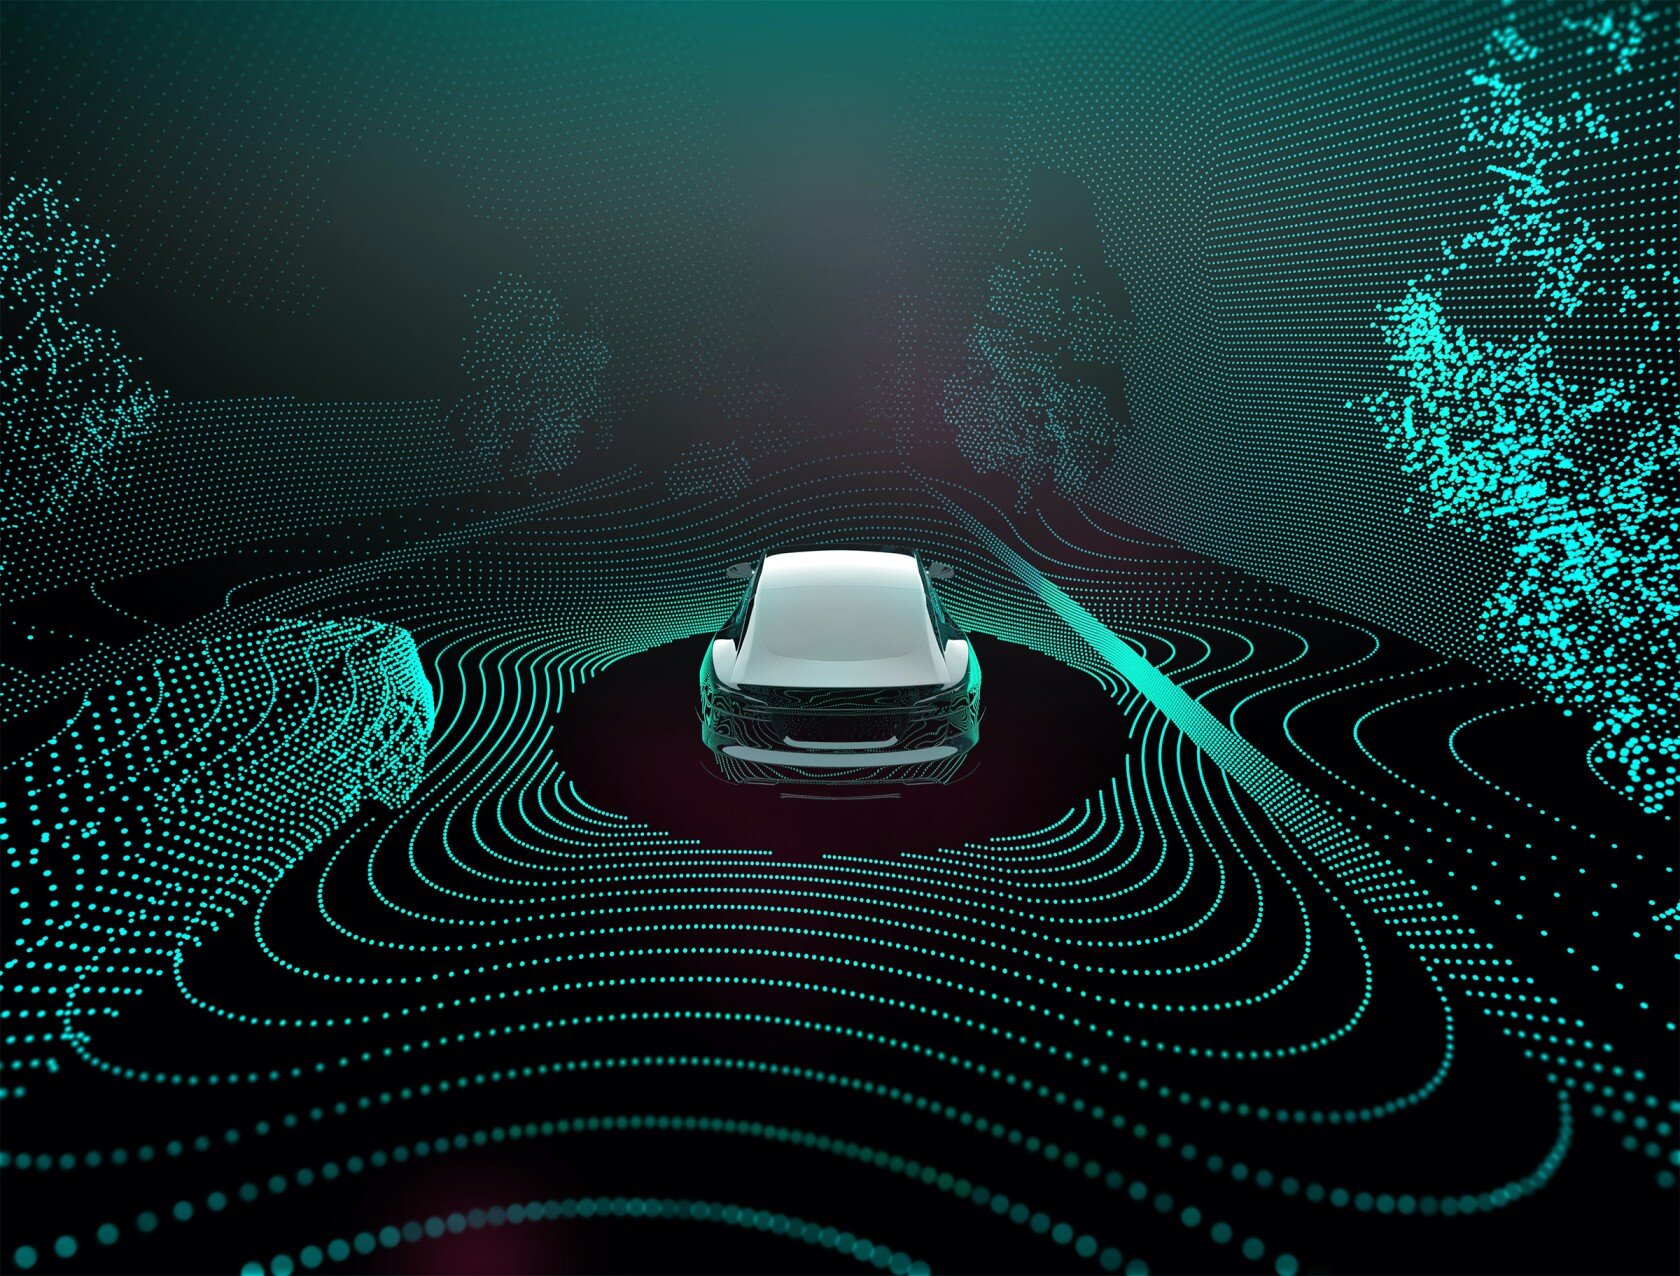 Project could enable self-driving cars to make better decisions faster and avoid collisions